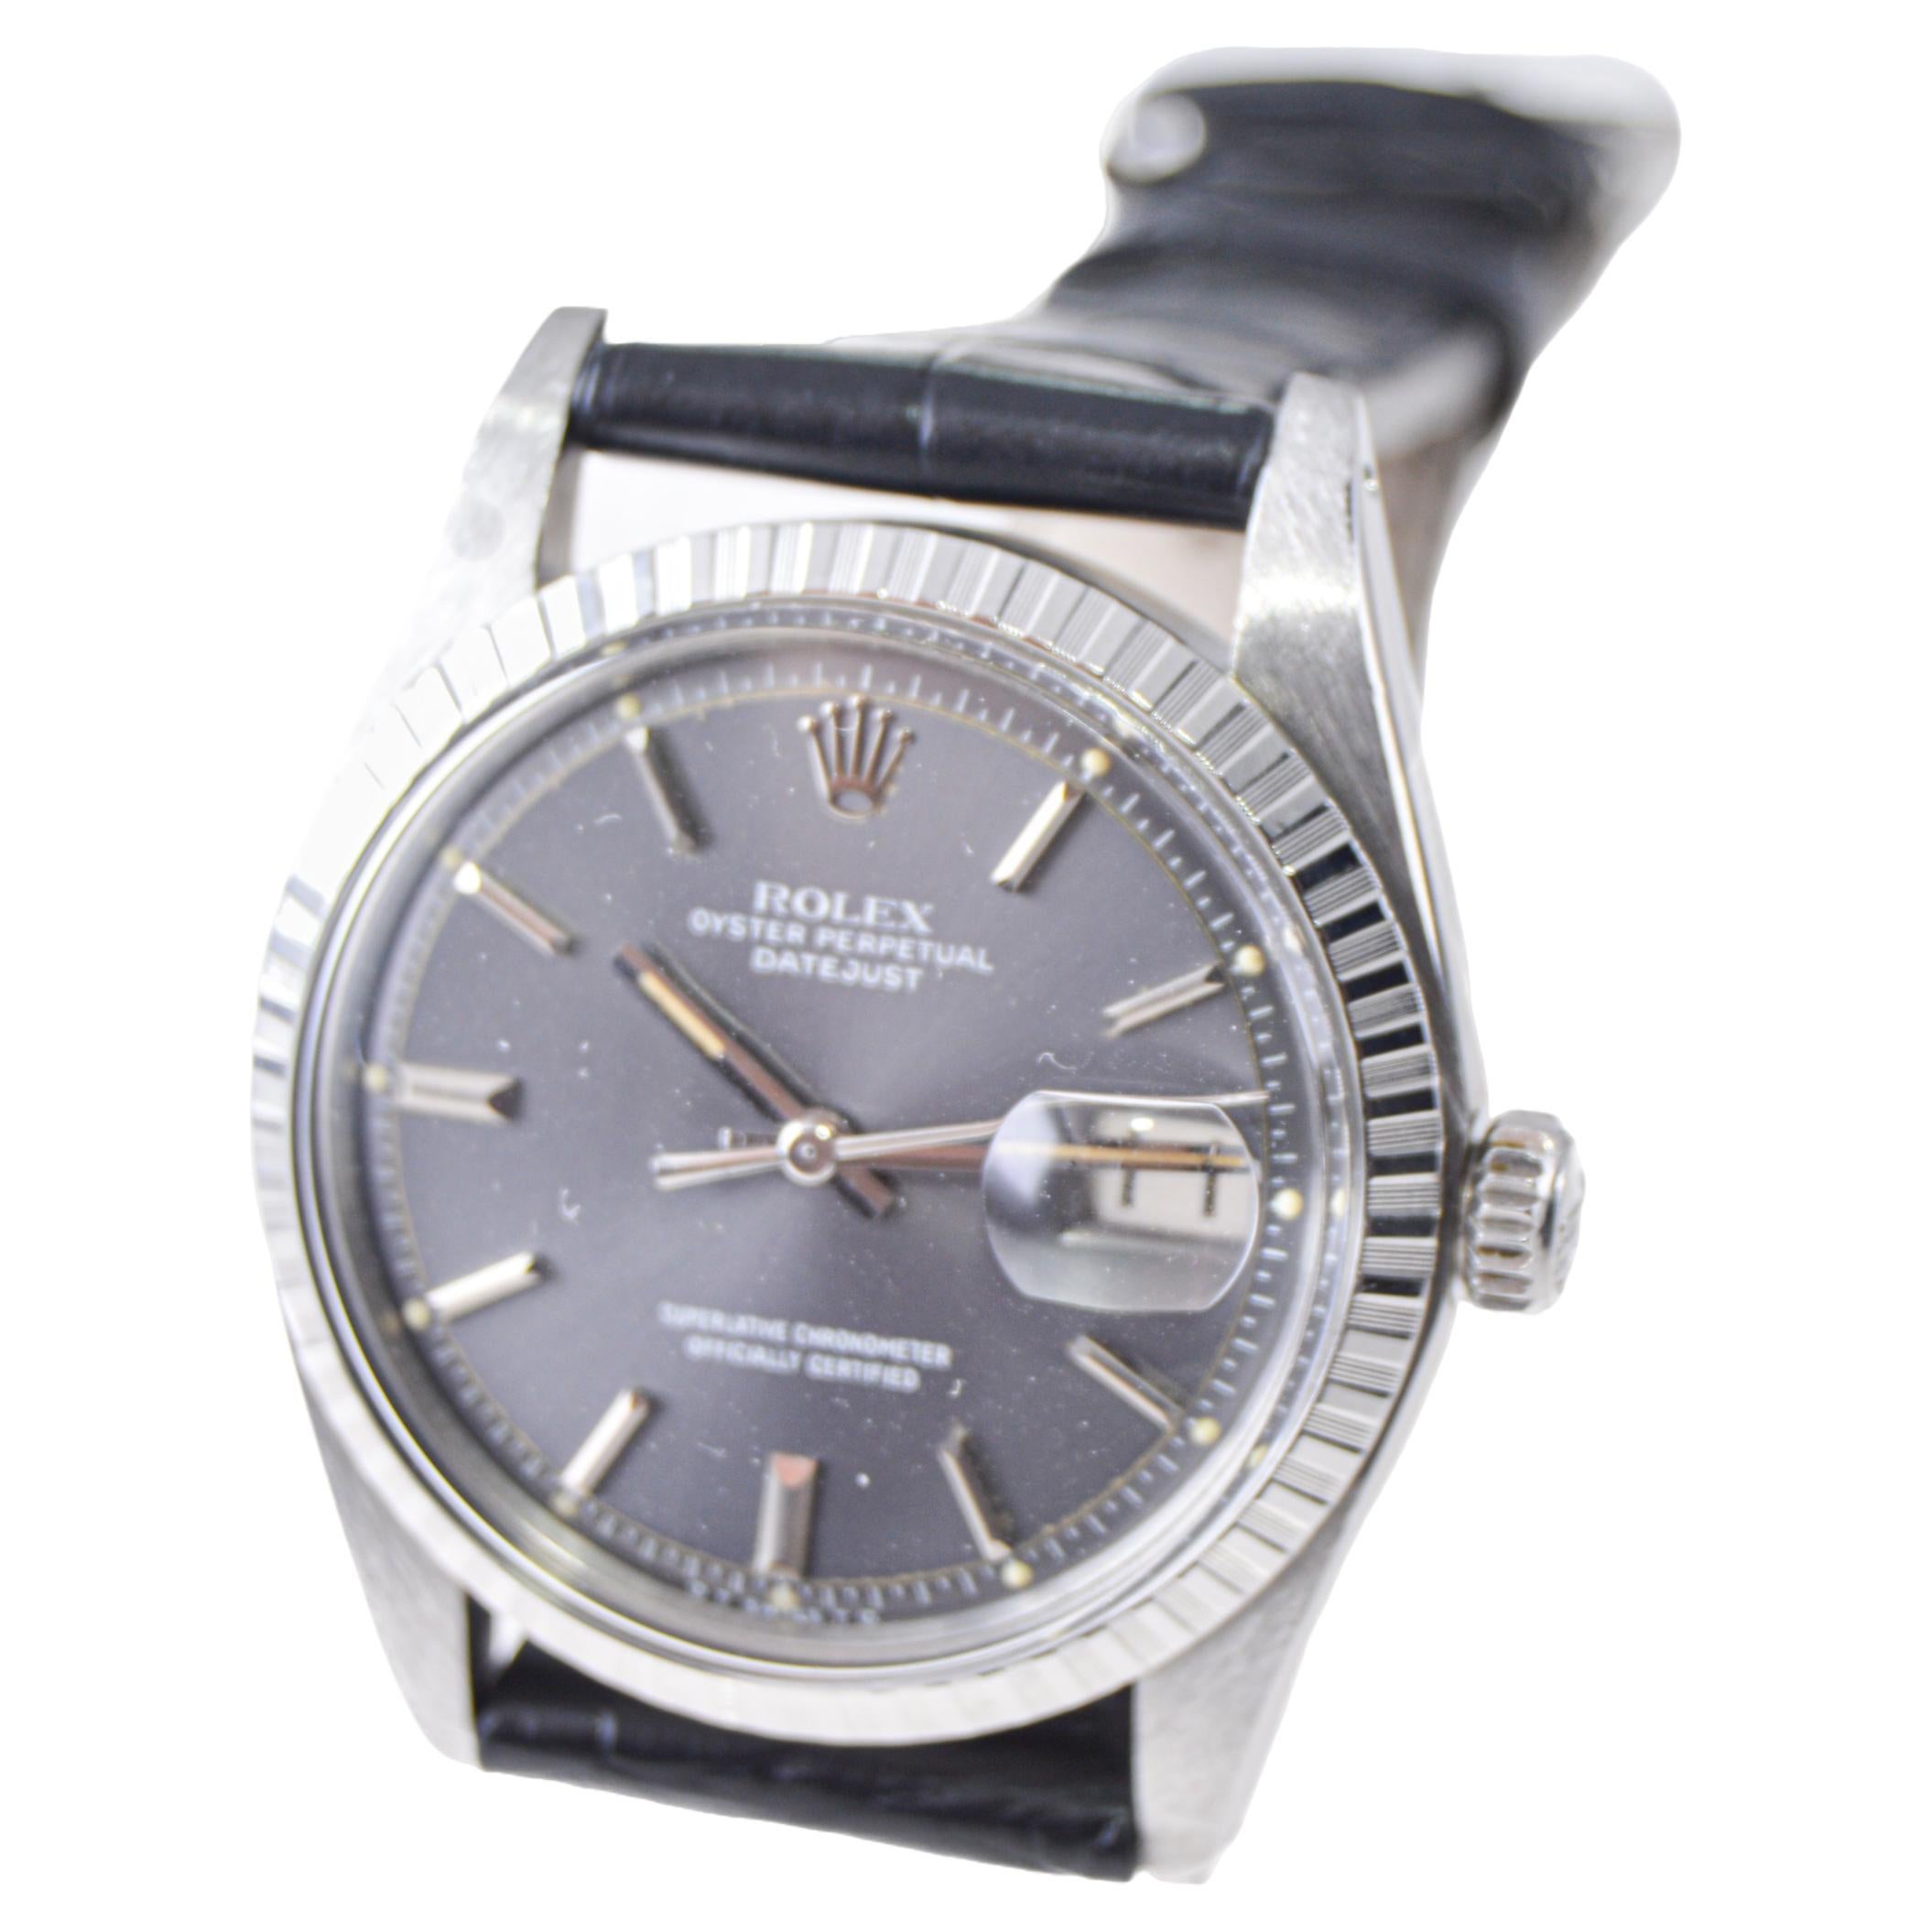 Rolex Steel Datejust with Rare Original Charcoal Dial from, 1960's For Sale 2